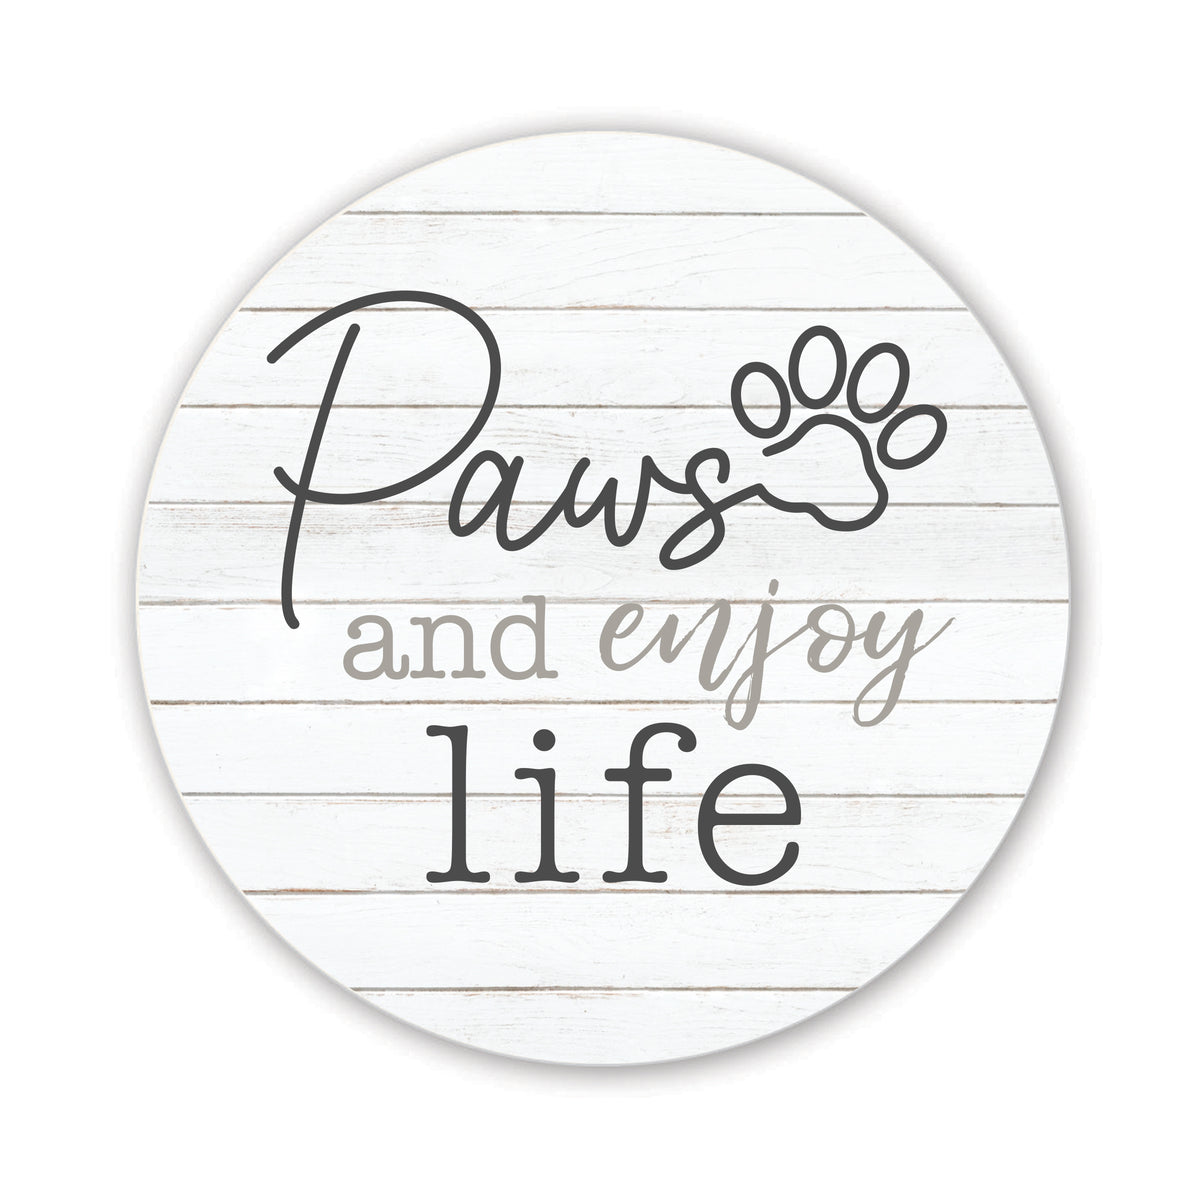 Refrigerator Magnet Perfect Gift Idea For Pet Owners - Paws &amp; Enjoy Life